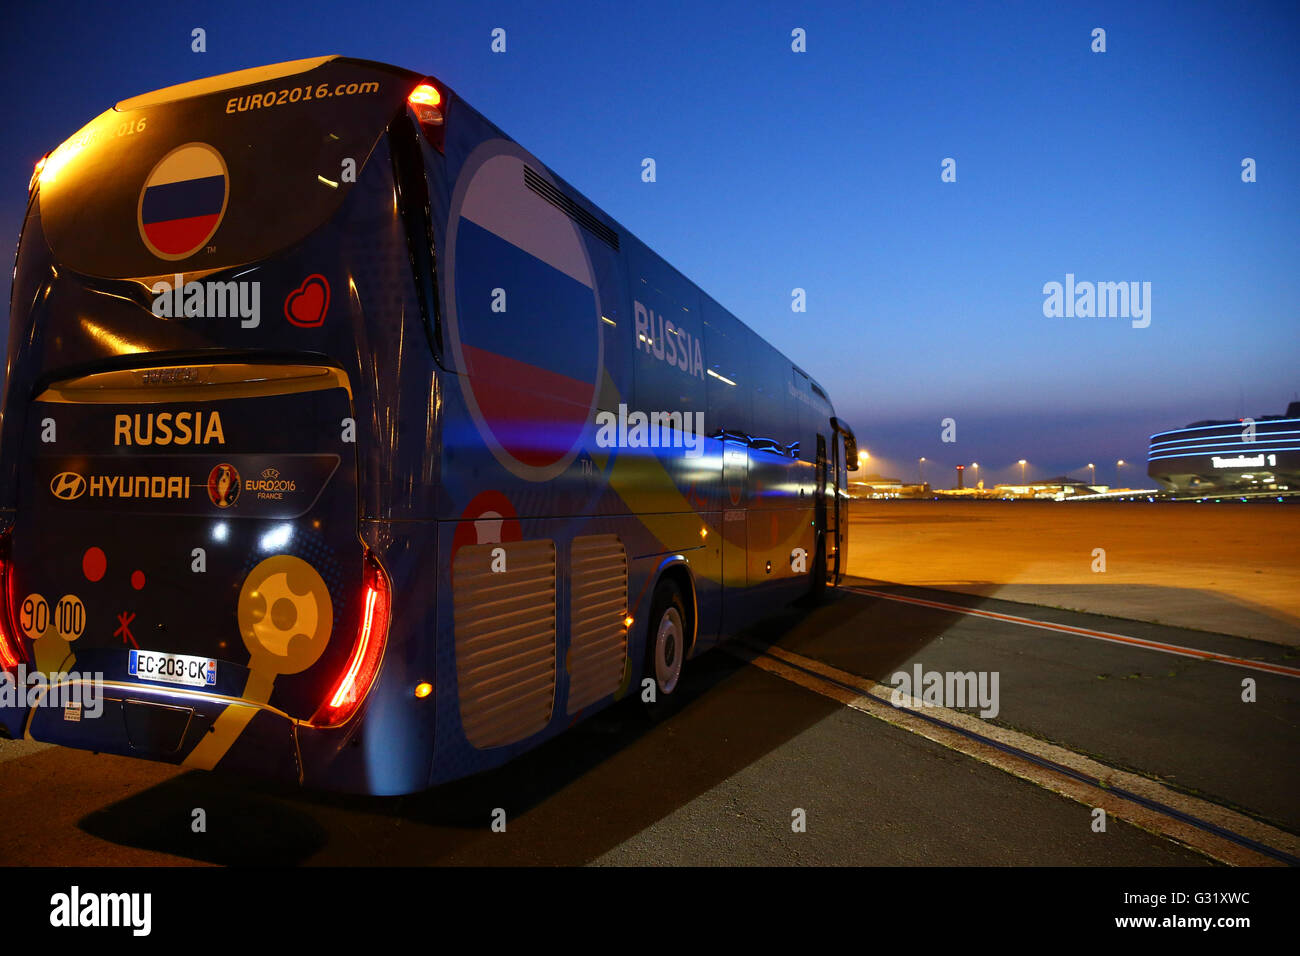 05.06.2016. Charles de Gaulles Airport, Paris, France. The Russian Euro 2016  football team arrives for the Euro tournament. The Hyundai team bus whisks  the team away Stock Photo - Alamy